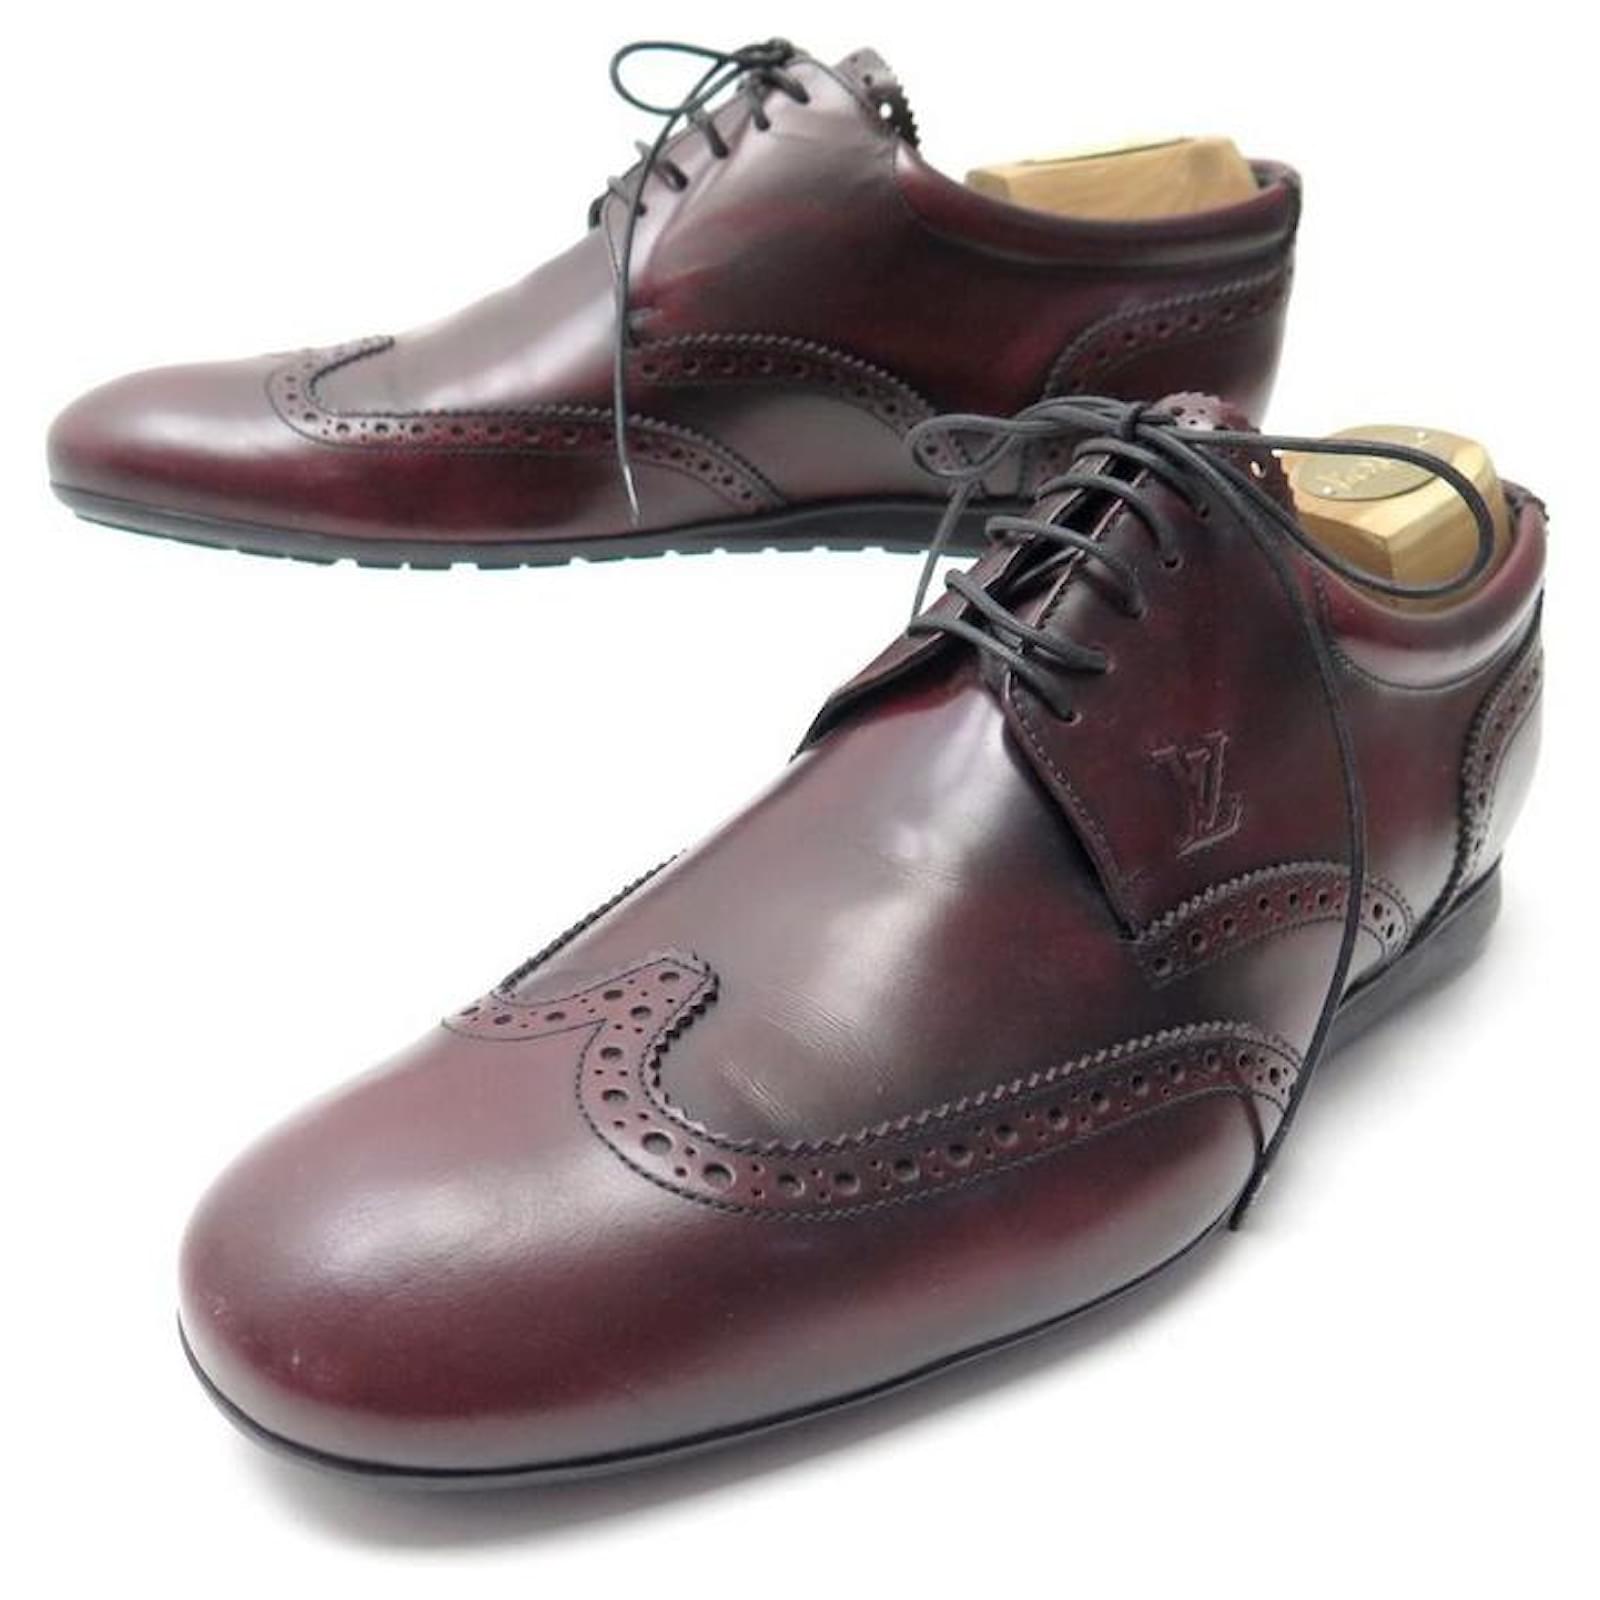 LOUIS VUITTON DERBY GRAMERCY SHOES 8 42 BURGUNDY LEATHER SHOES